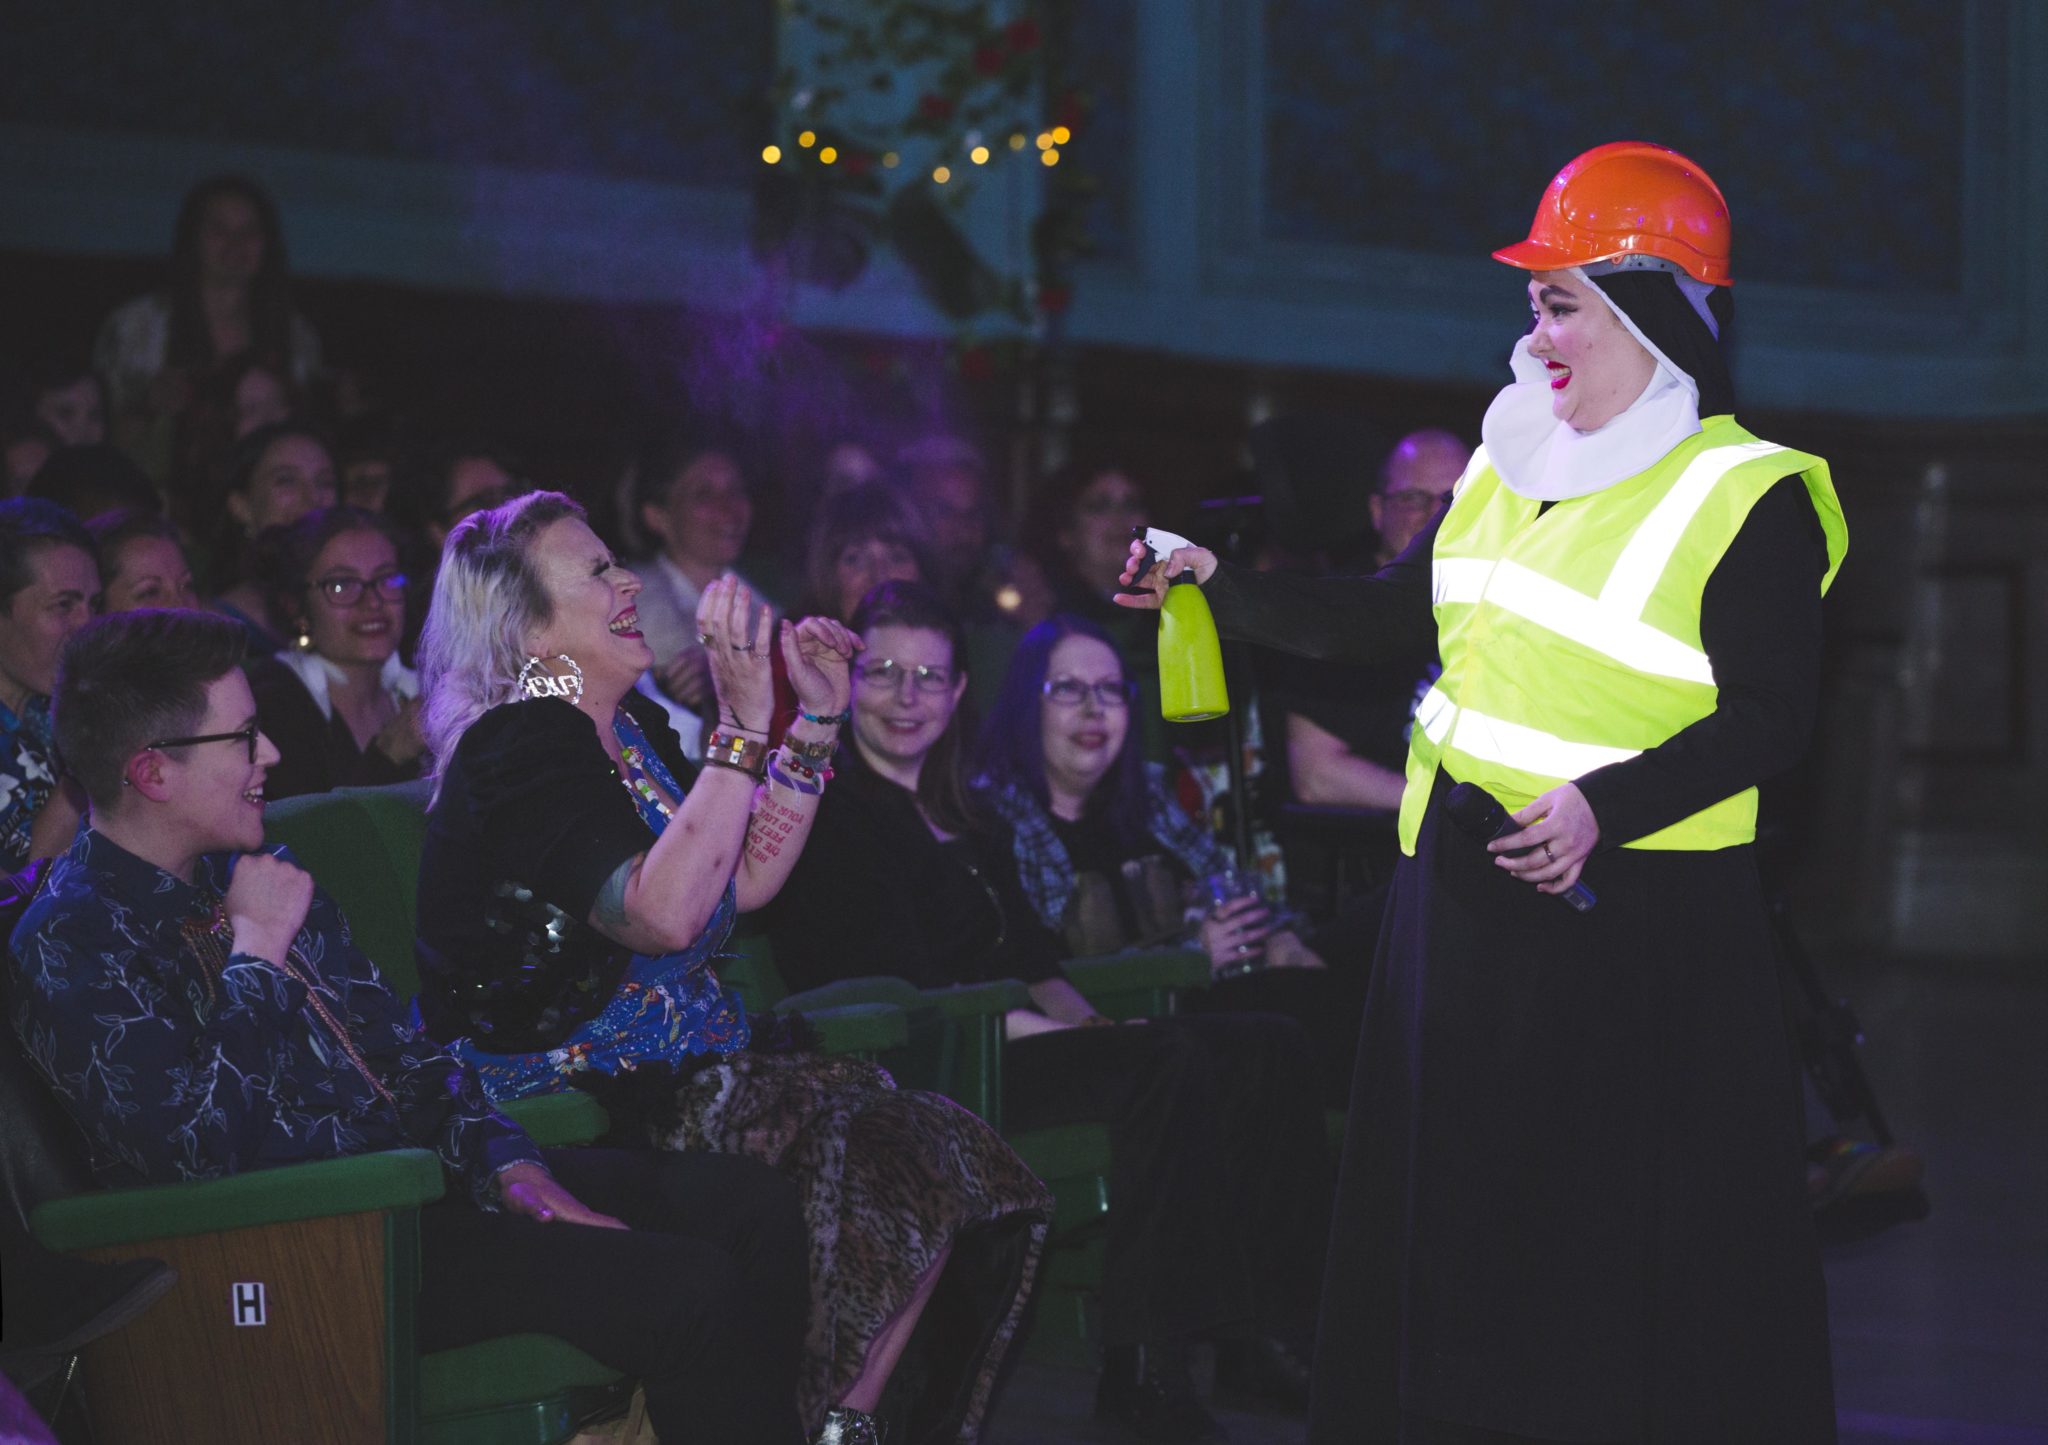 Sister Mary Berry, of drag act, Shesus and the Sisters, wears a hard hat and high vis vest and is squirting an audience member with mist from a bottle looking cheeky.